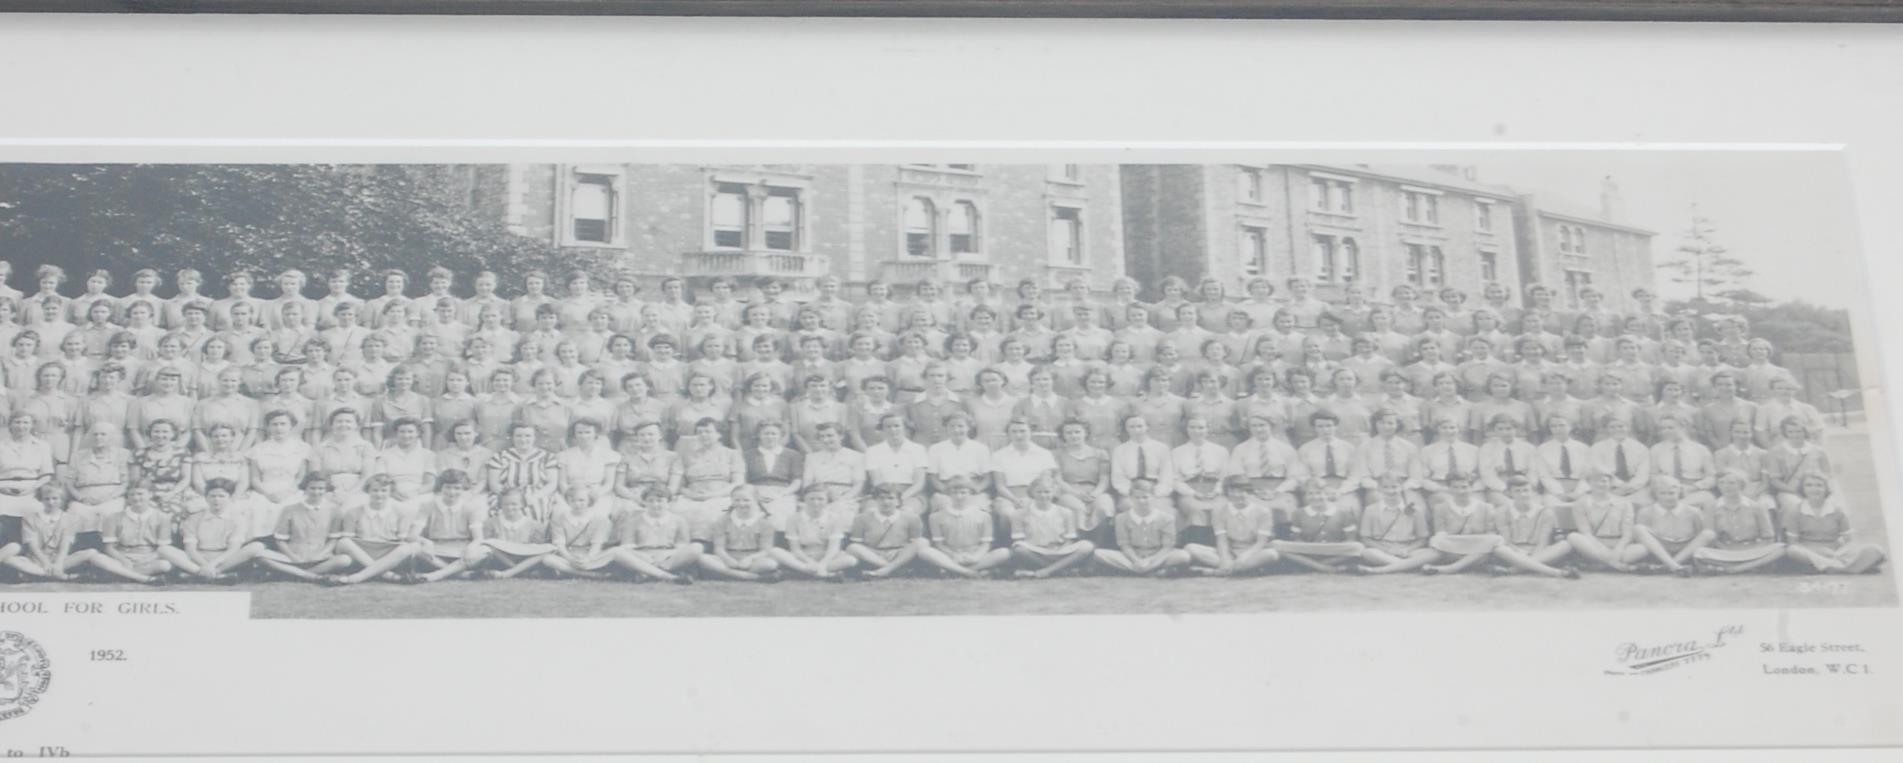 COOLECTION OF FOUR SCHOOL PHOTGRAPHS OF CLIFTON HIGH SCHOOL FOR GIRLS - Image 16 of 18